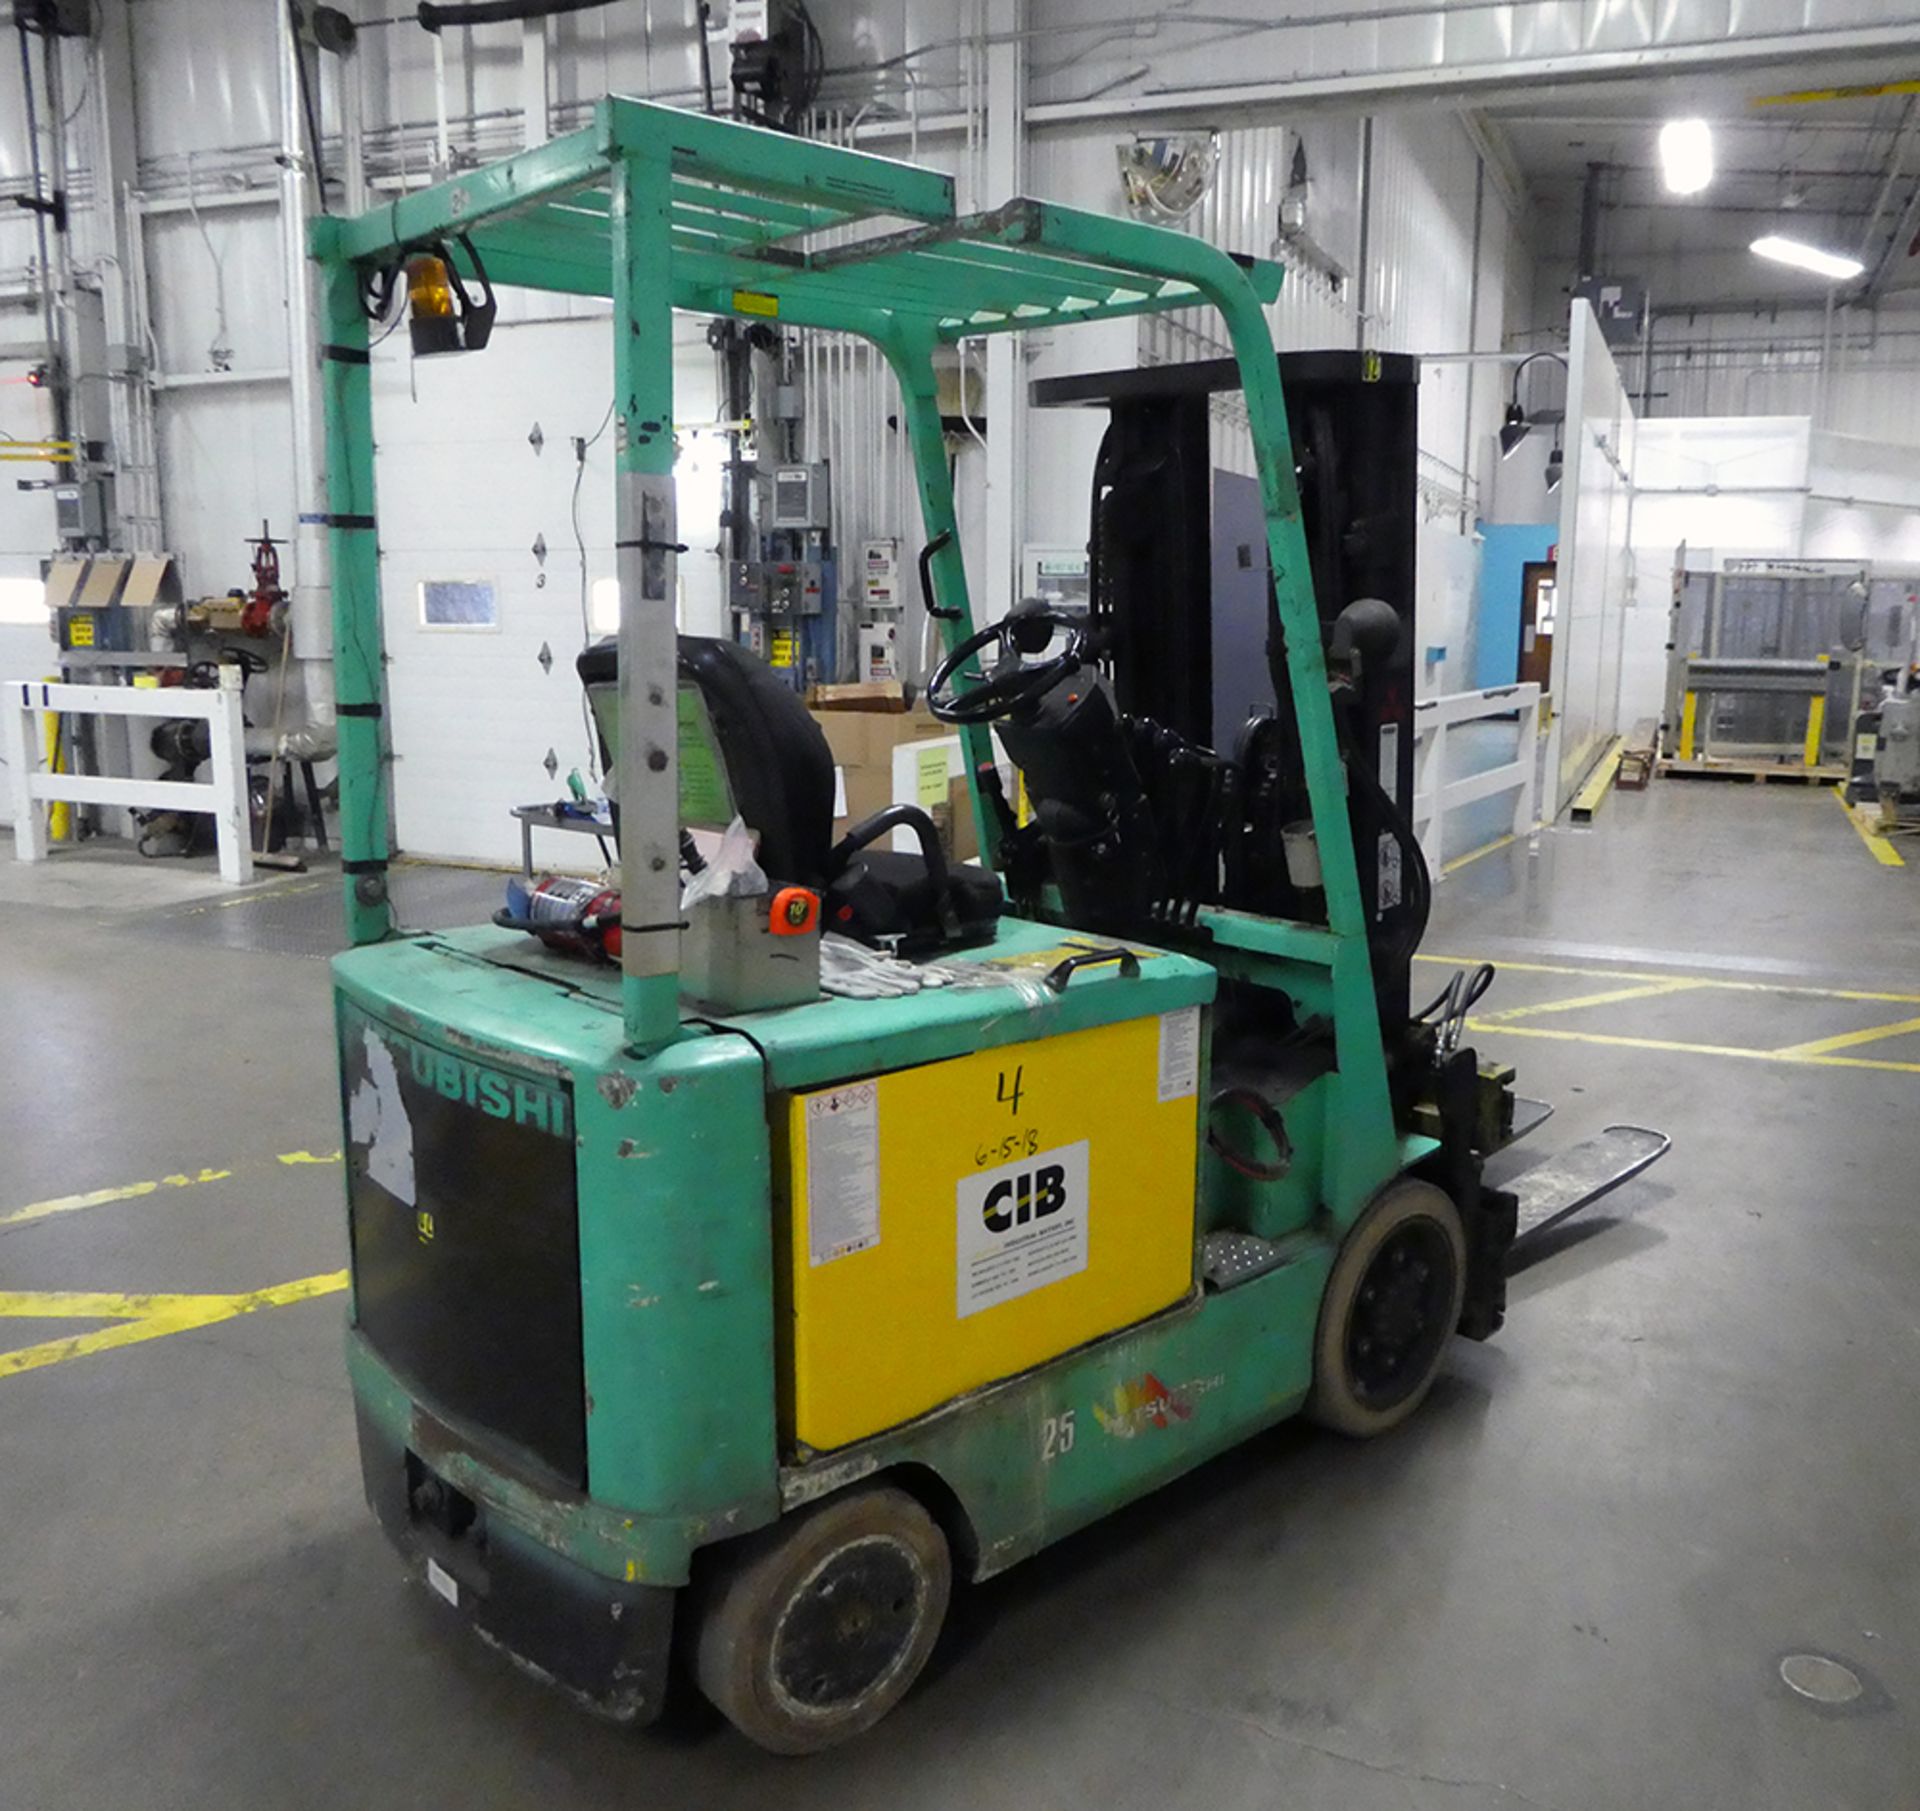 1999 Mitsubishi 21FBC25E 5,000 lb Electric Forklift With Turn-A-Fork - Image 3 of 13